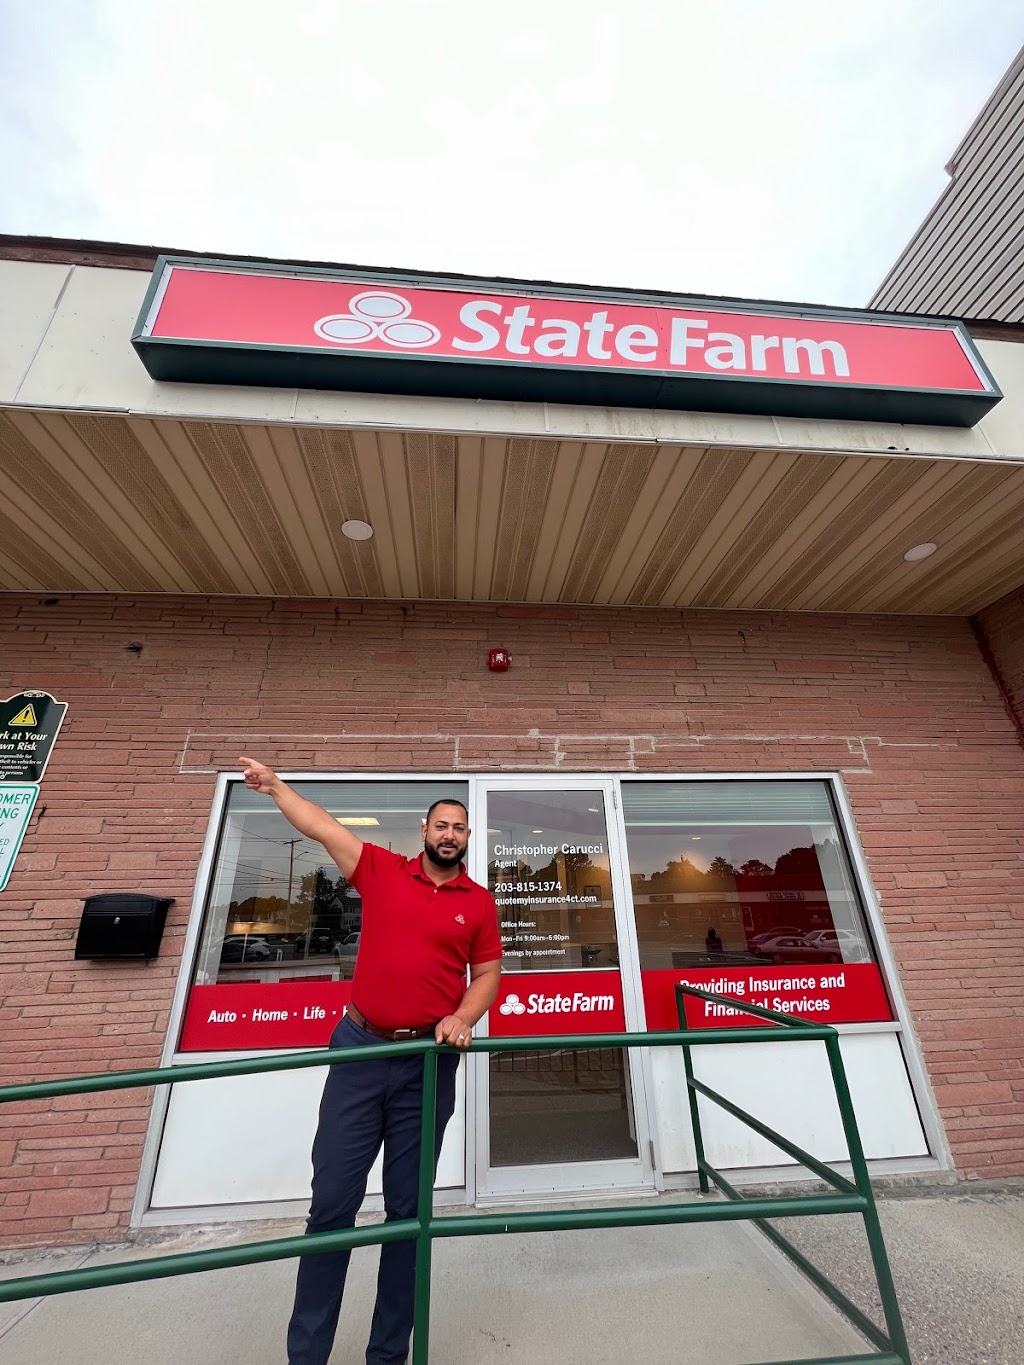 Christopher Carucci - State Farm Insurance Agent | 4 Ocean Ave, West Haven, CT 06516 | Phone: (203) 815-1374